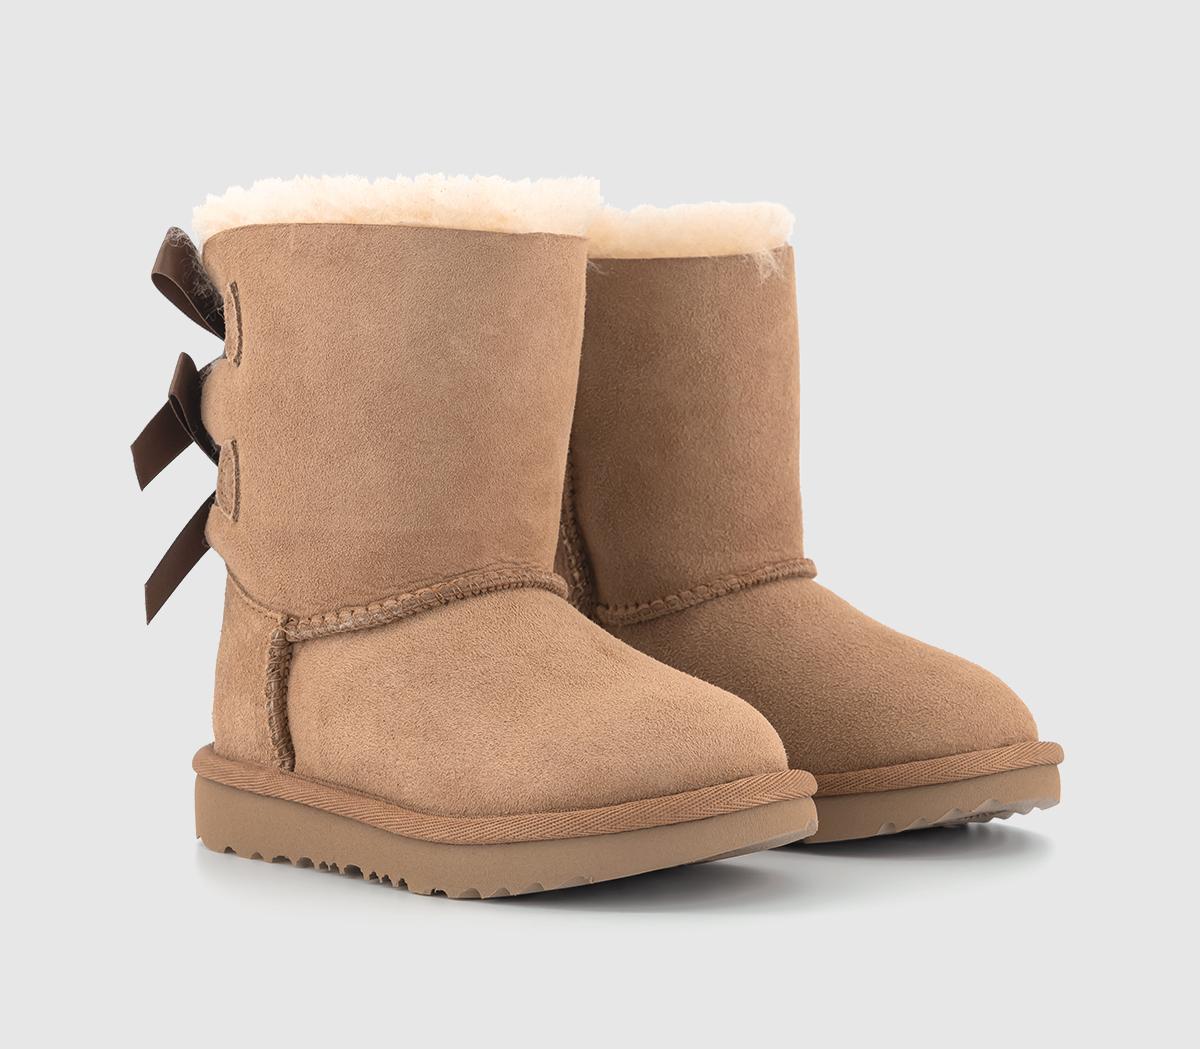 UGG Kids Toddler Bailey Bow Ii Boots Chestnut Tan, 9infant